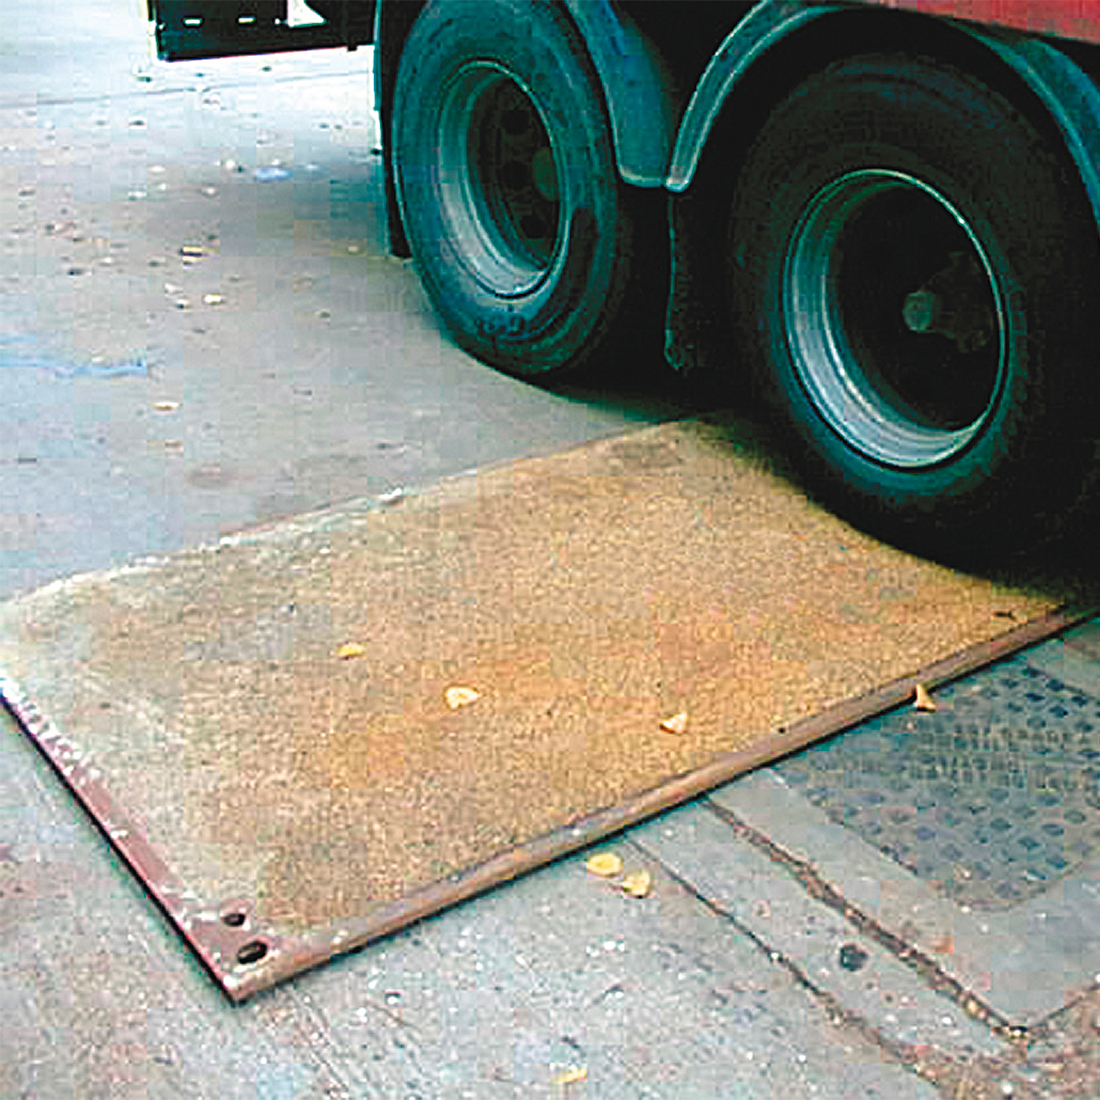 Road Plate 04 x 04 x 1/2